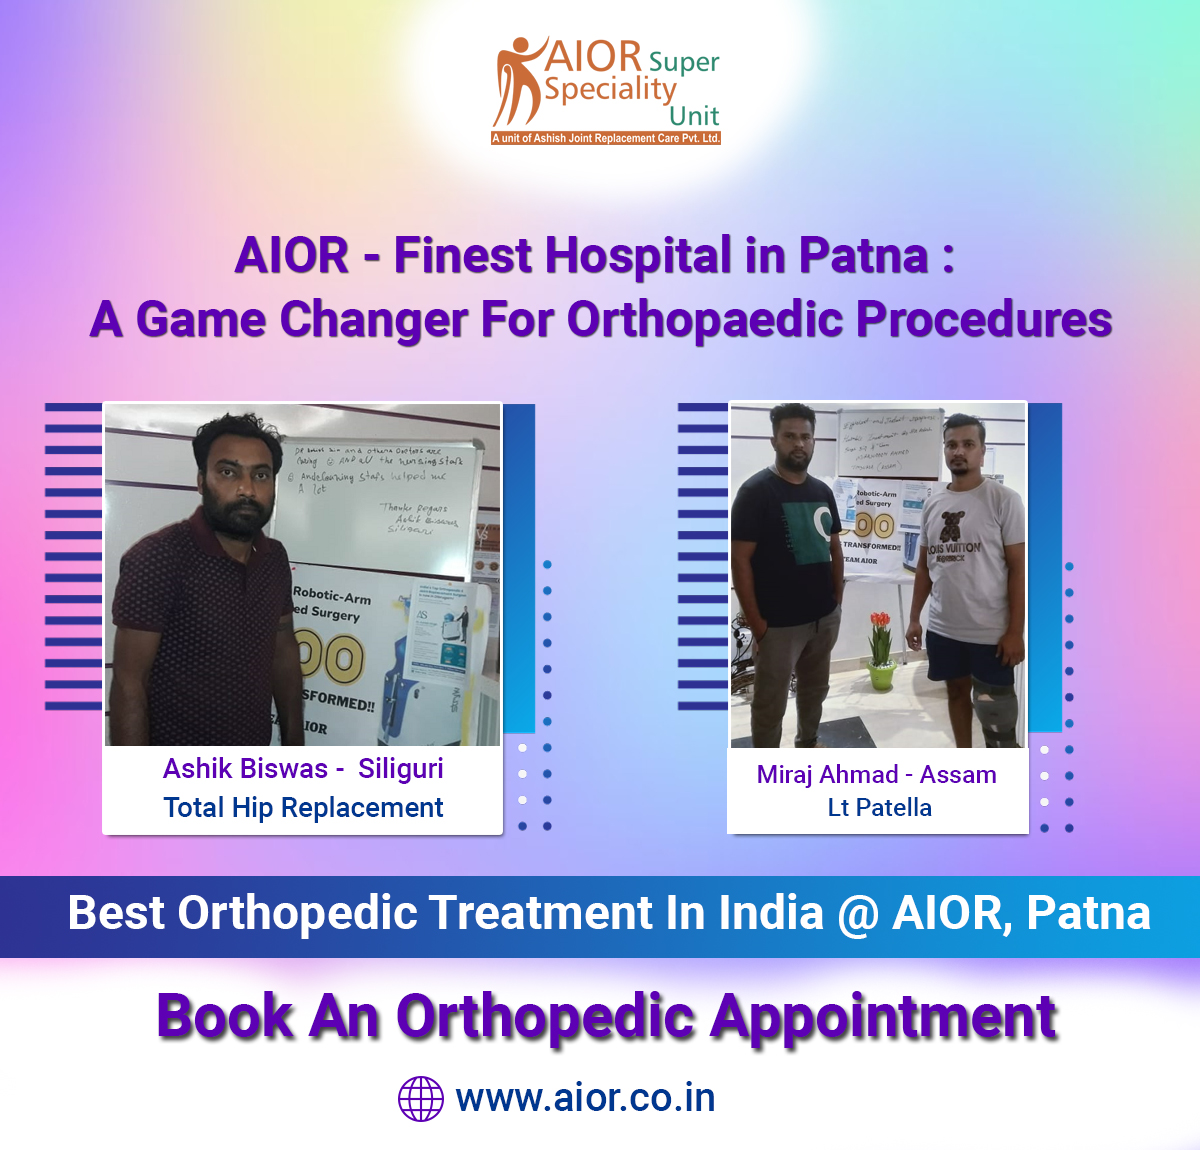 AIOR -Finest Hospital in Patna : A Game Changer For Orthopedic Procedures
#patientcare #successstories #patientsstory #patientsuccessstory #kneereplacement #patientsuccessstories #aclsurgery #surgicalreconstruction #cruciateligamentacl #patna #bihar